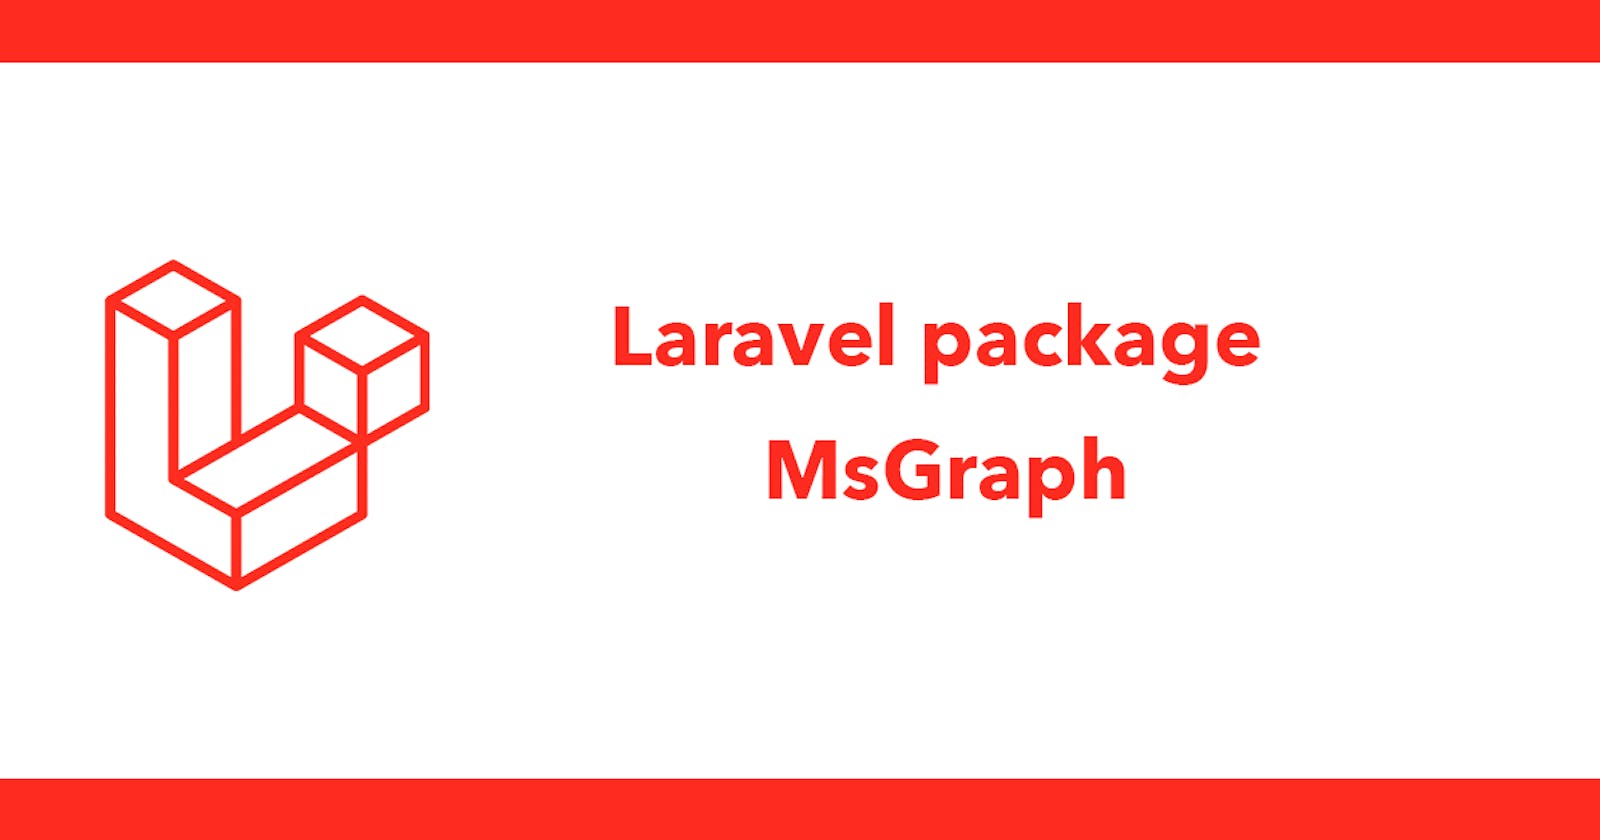 Laravel package MsGraph